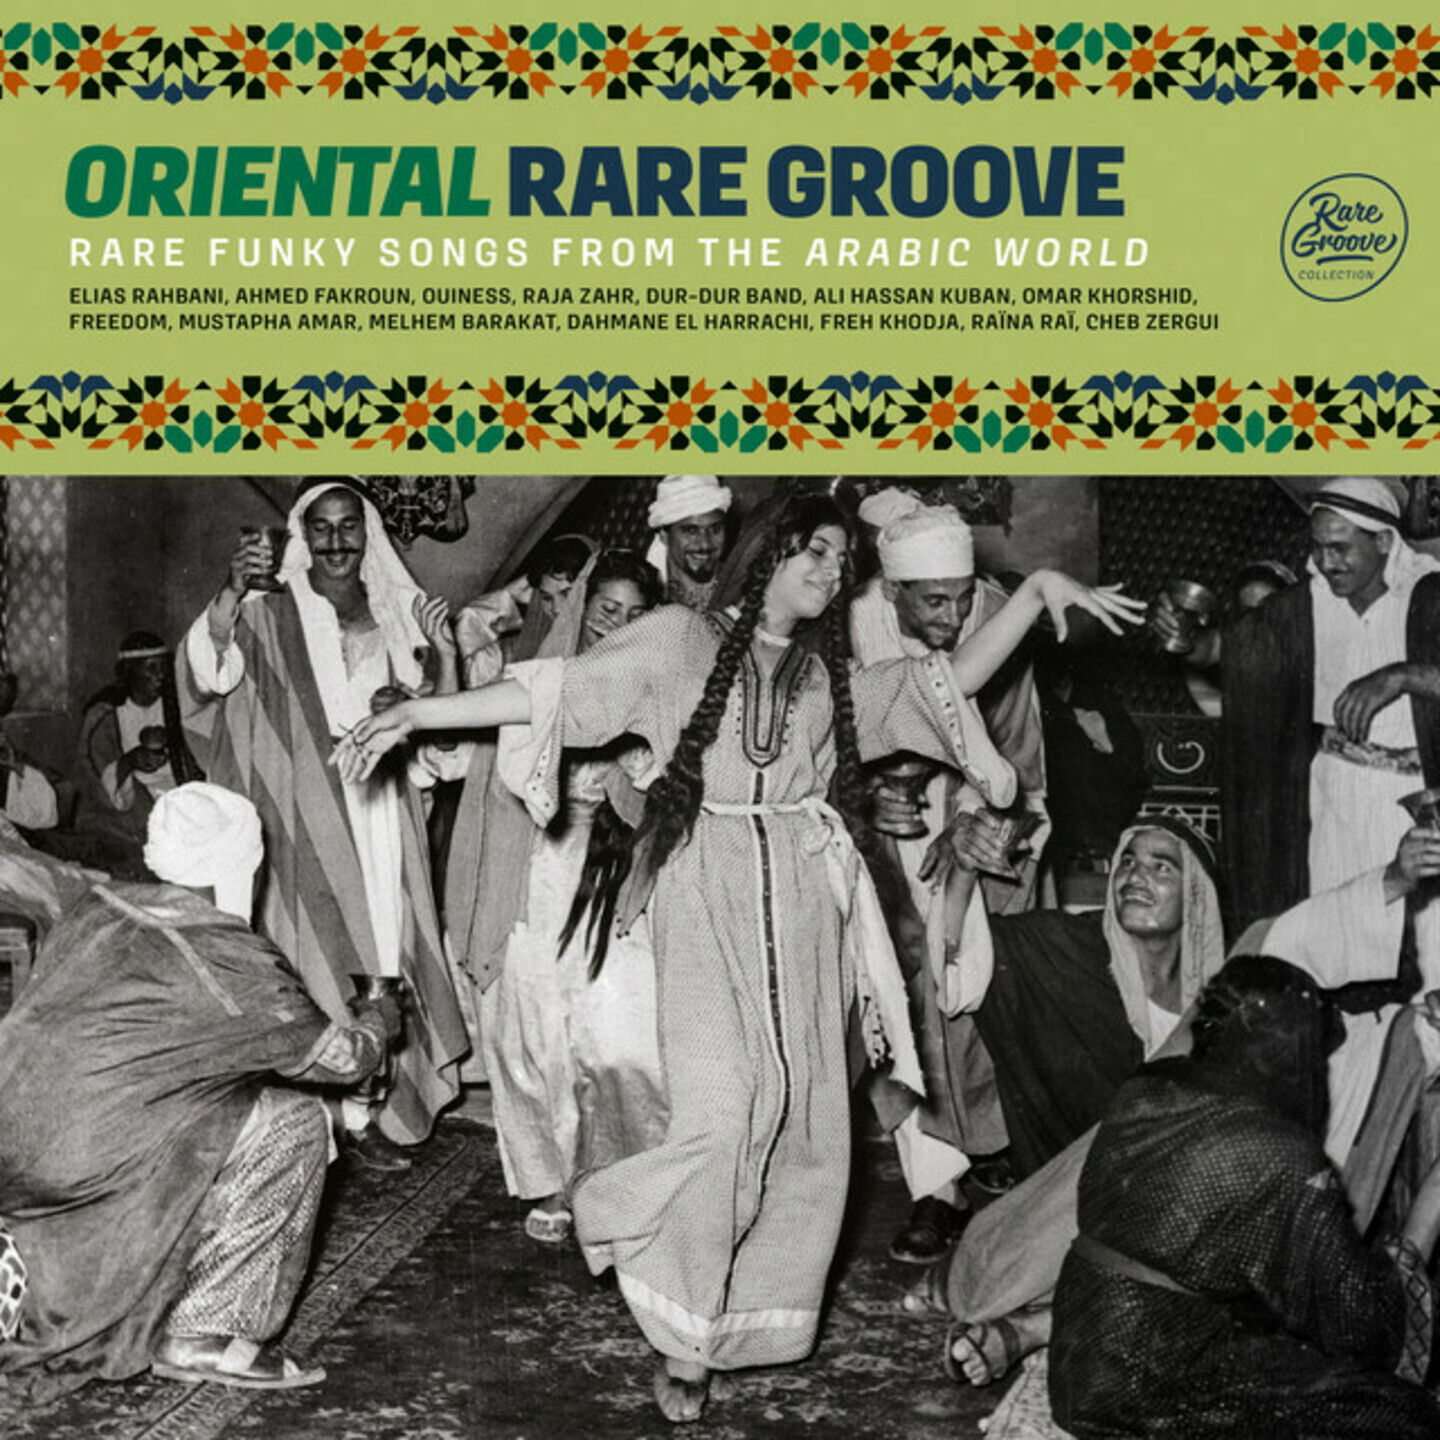 V/A - Oriental Rare Groove (Rare Funky Songs From The Arabic World) 2xLP